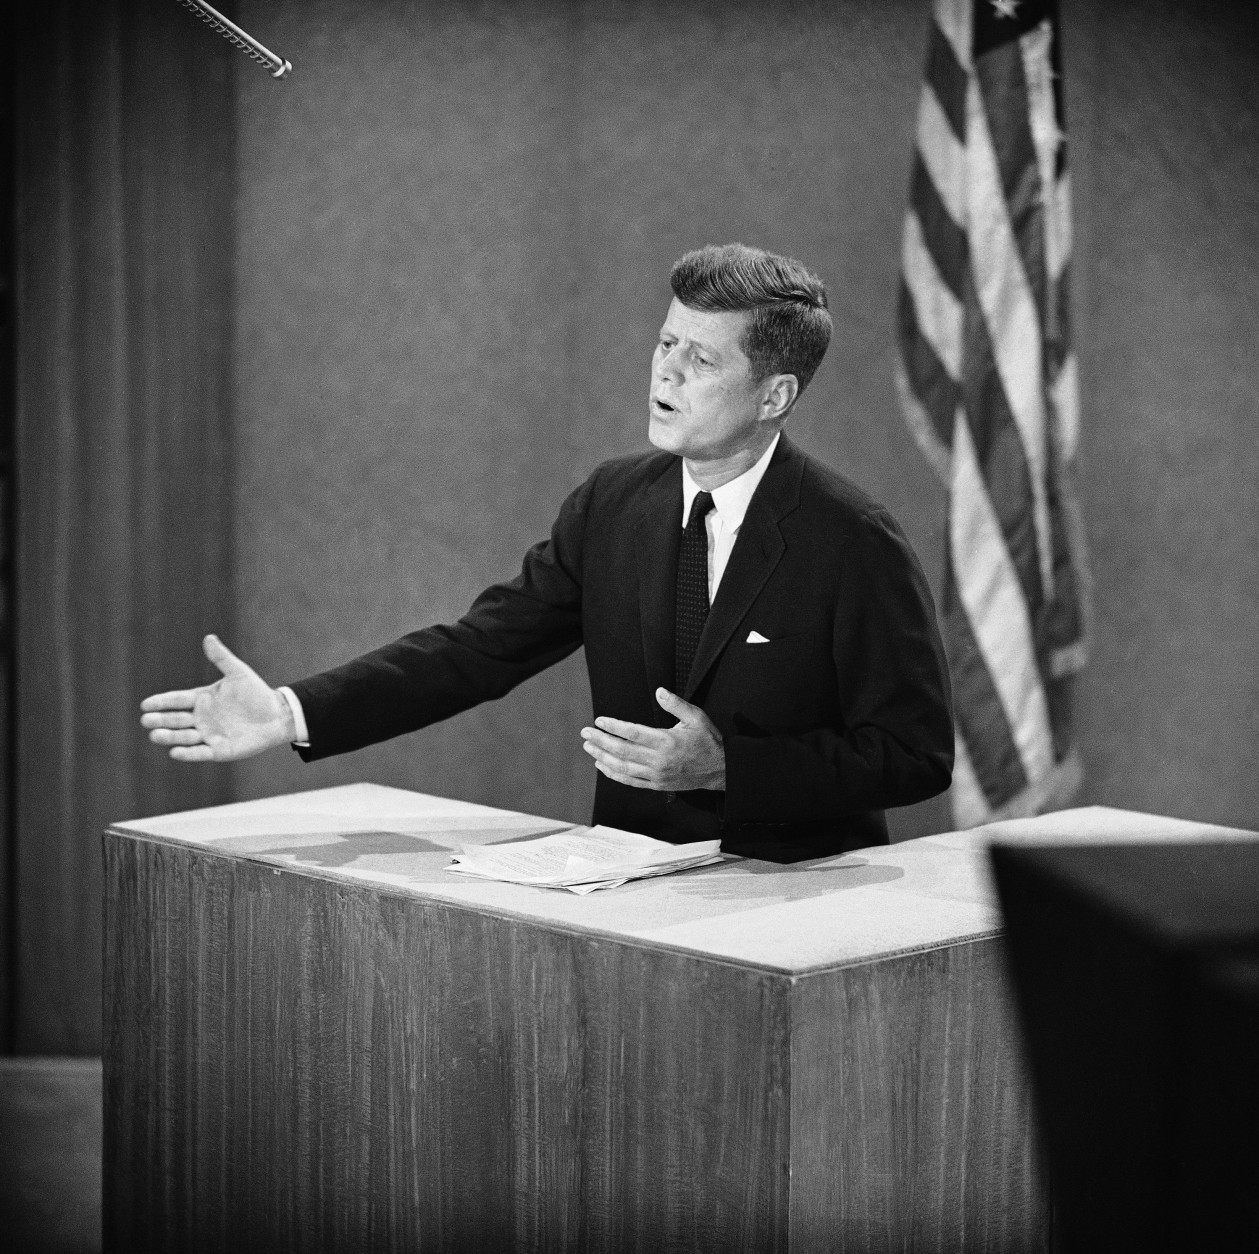 Sen. John F. Kennedy gestures during third session of the great debate with vice President Richard M. Nixon. This picture was made in a New York television studio, Oct. 13, 1960, where Kennedy appeared while Nixon was televised from Los Angeles. (AP Photo)